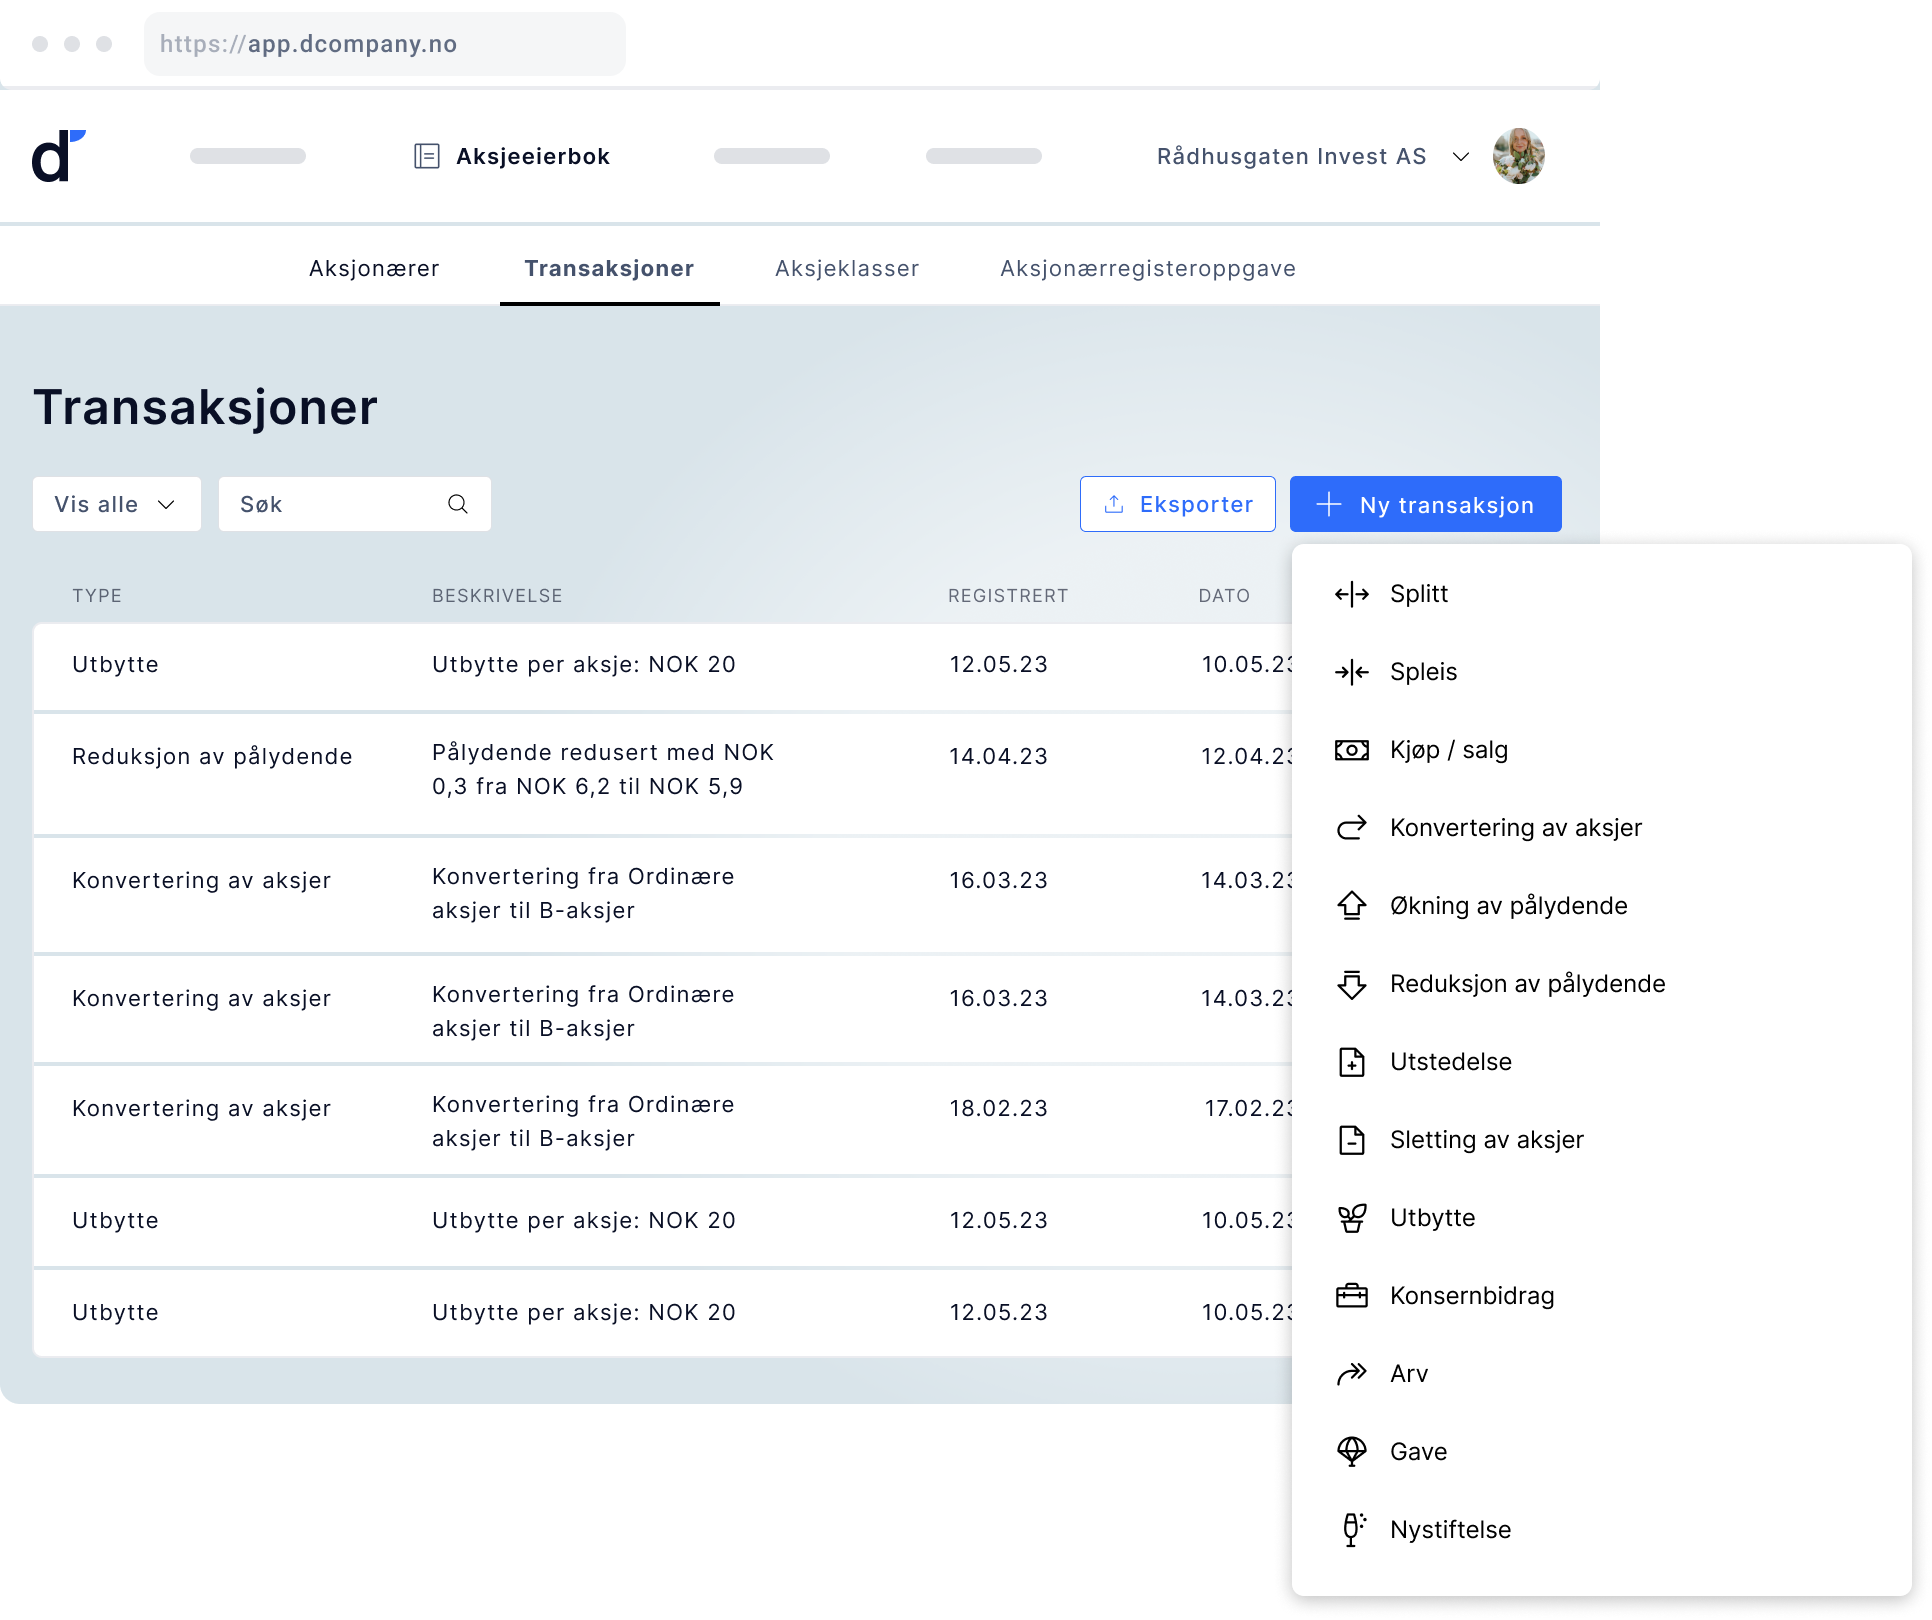 Transaction log in dCompany provides an overview of all historical transactions as well as options to register new transactions in a number of categories.